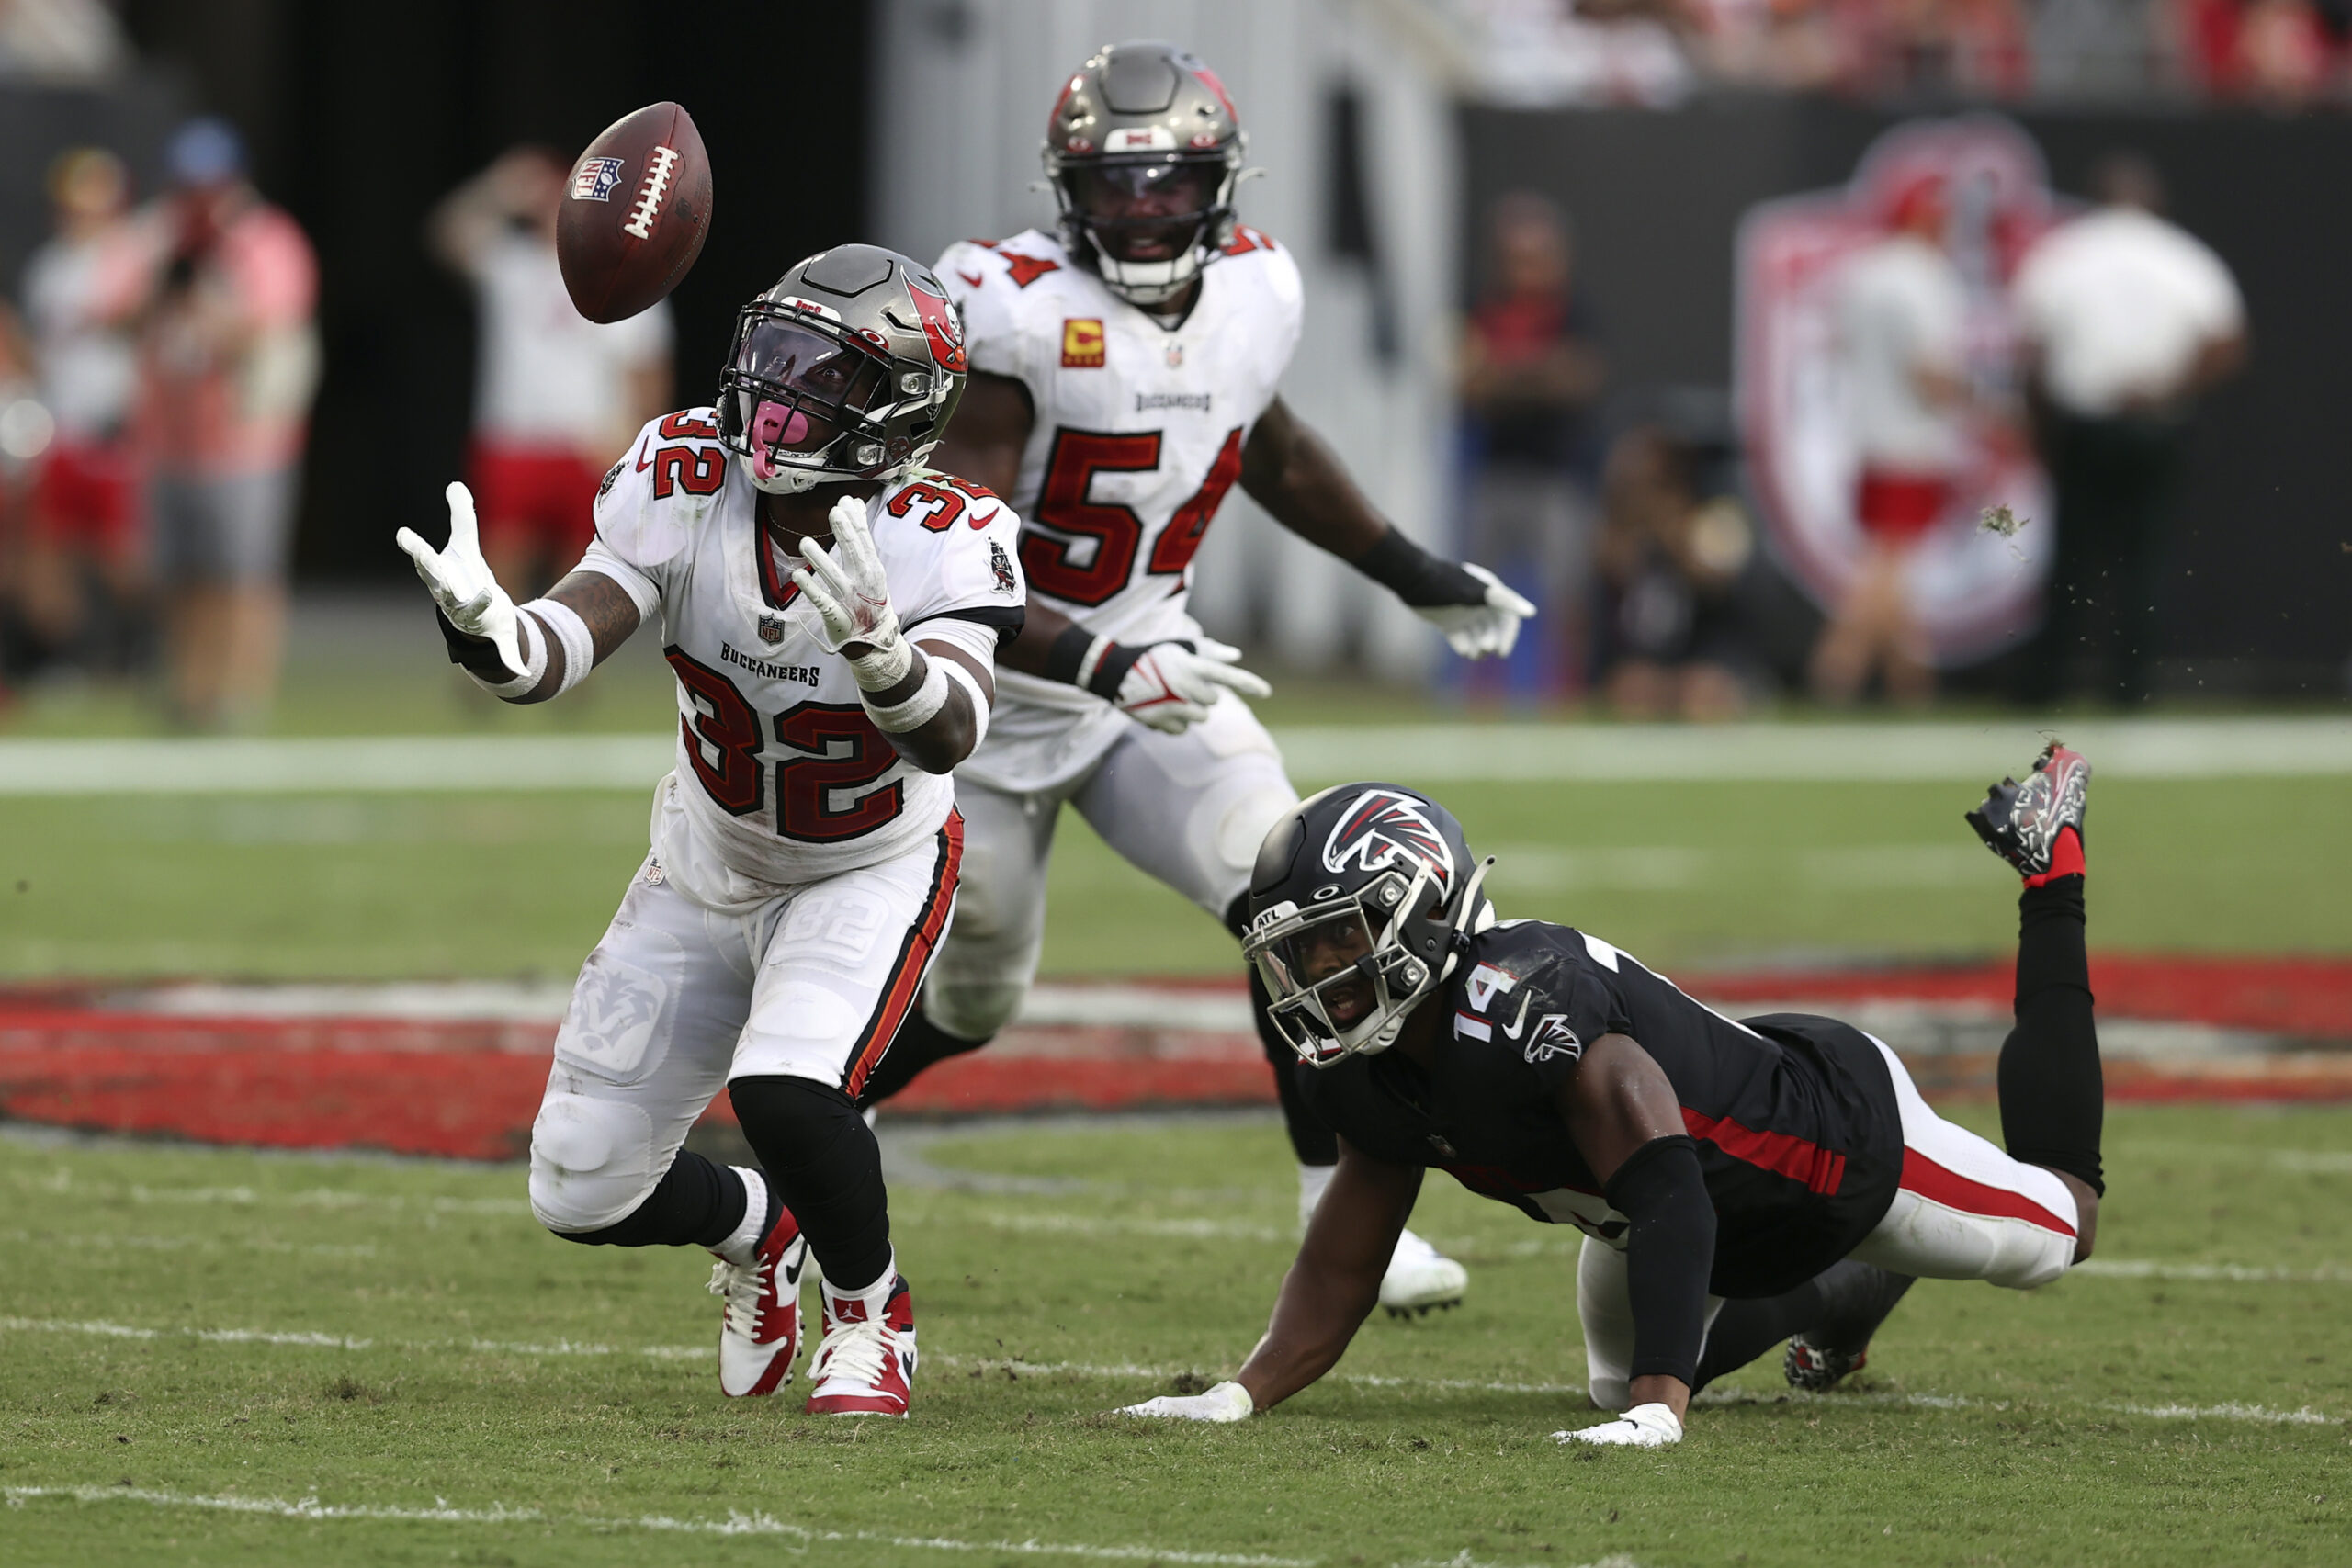 Tampa Bay Buccaneers safety Mike Edwards (32) intercepts a pass by Atlanta Falcons quarterback Matt Ryan that was intended for wide receiver Russell Gage (14) and returns it for a score during the second half of an NFL football game Sunday, Sept. 19, 2021, in Tampa, Fla. (AP Photo/Mark LoMoglio)